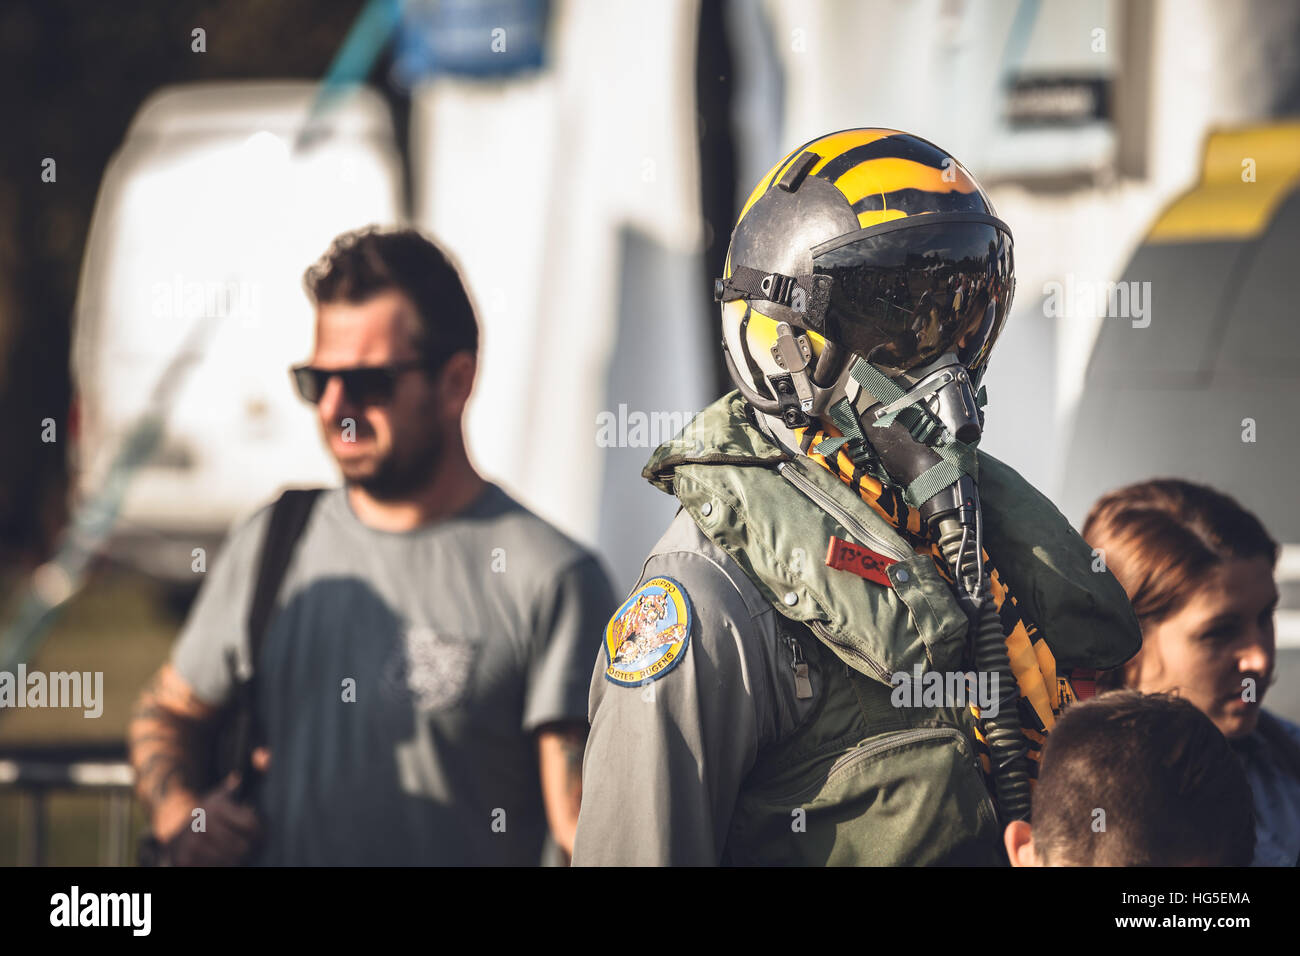 Italian military aviation complete costume for pilot with helmet with mask Stock Photo